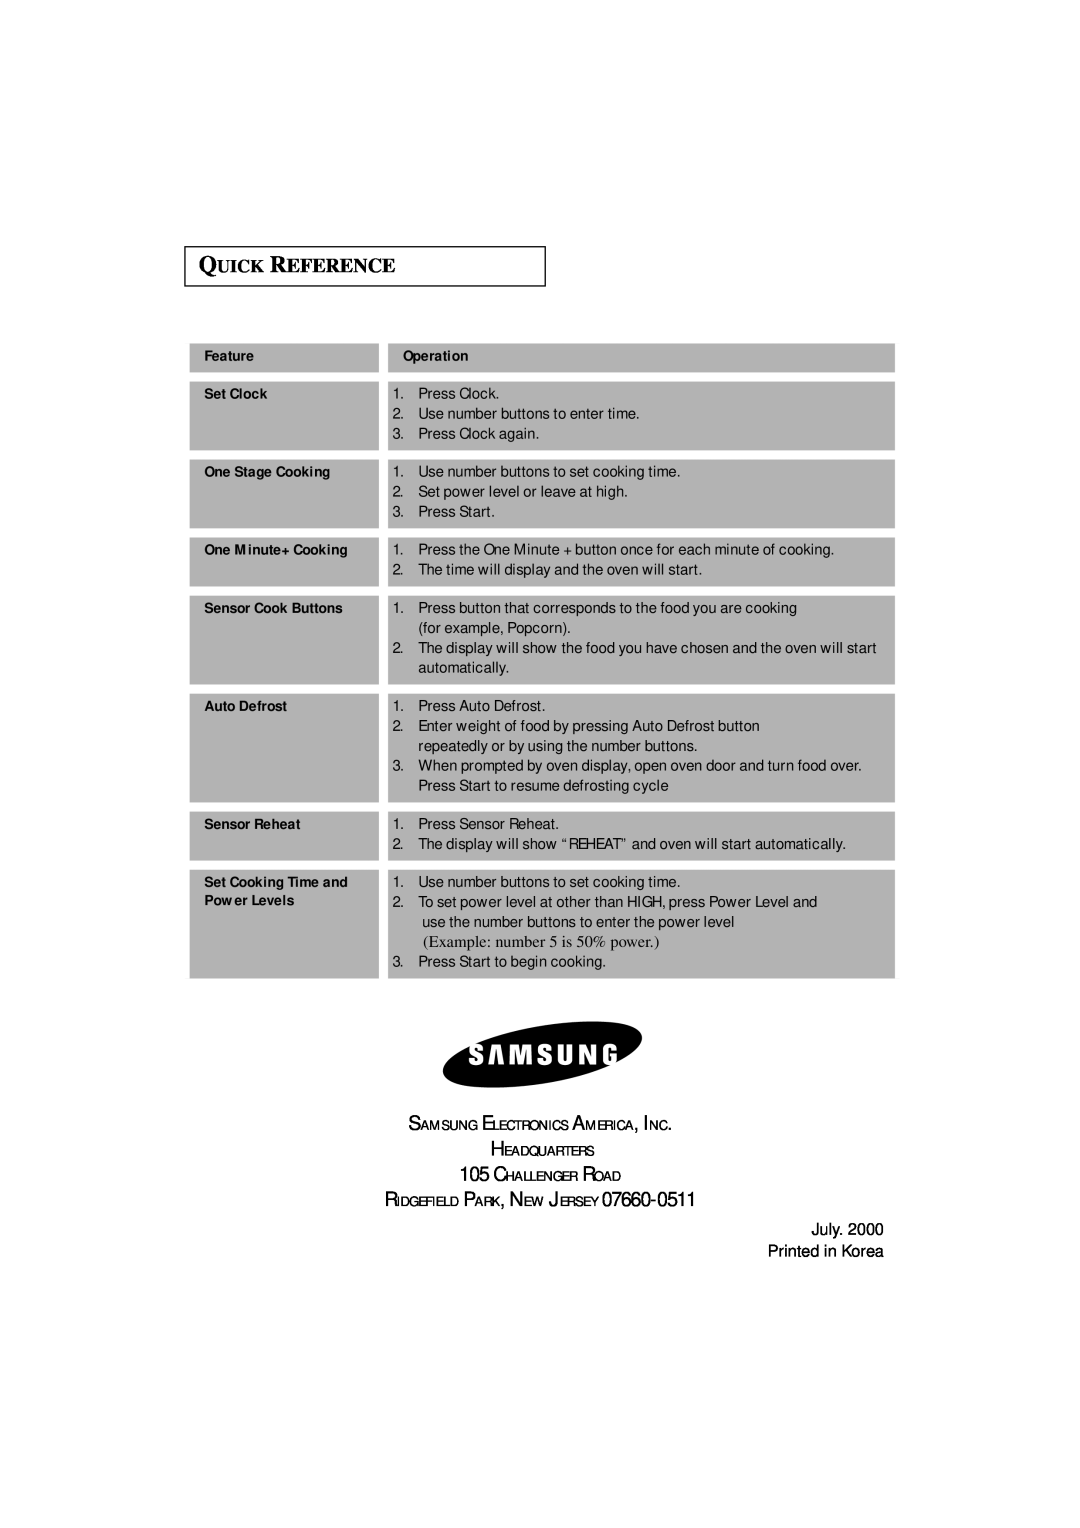 Samsung MS8899S manual Quick Reference, July Printed in Korea 